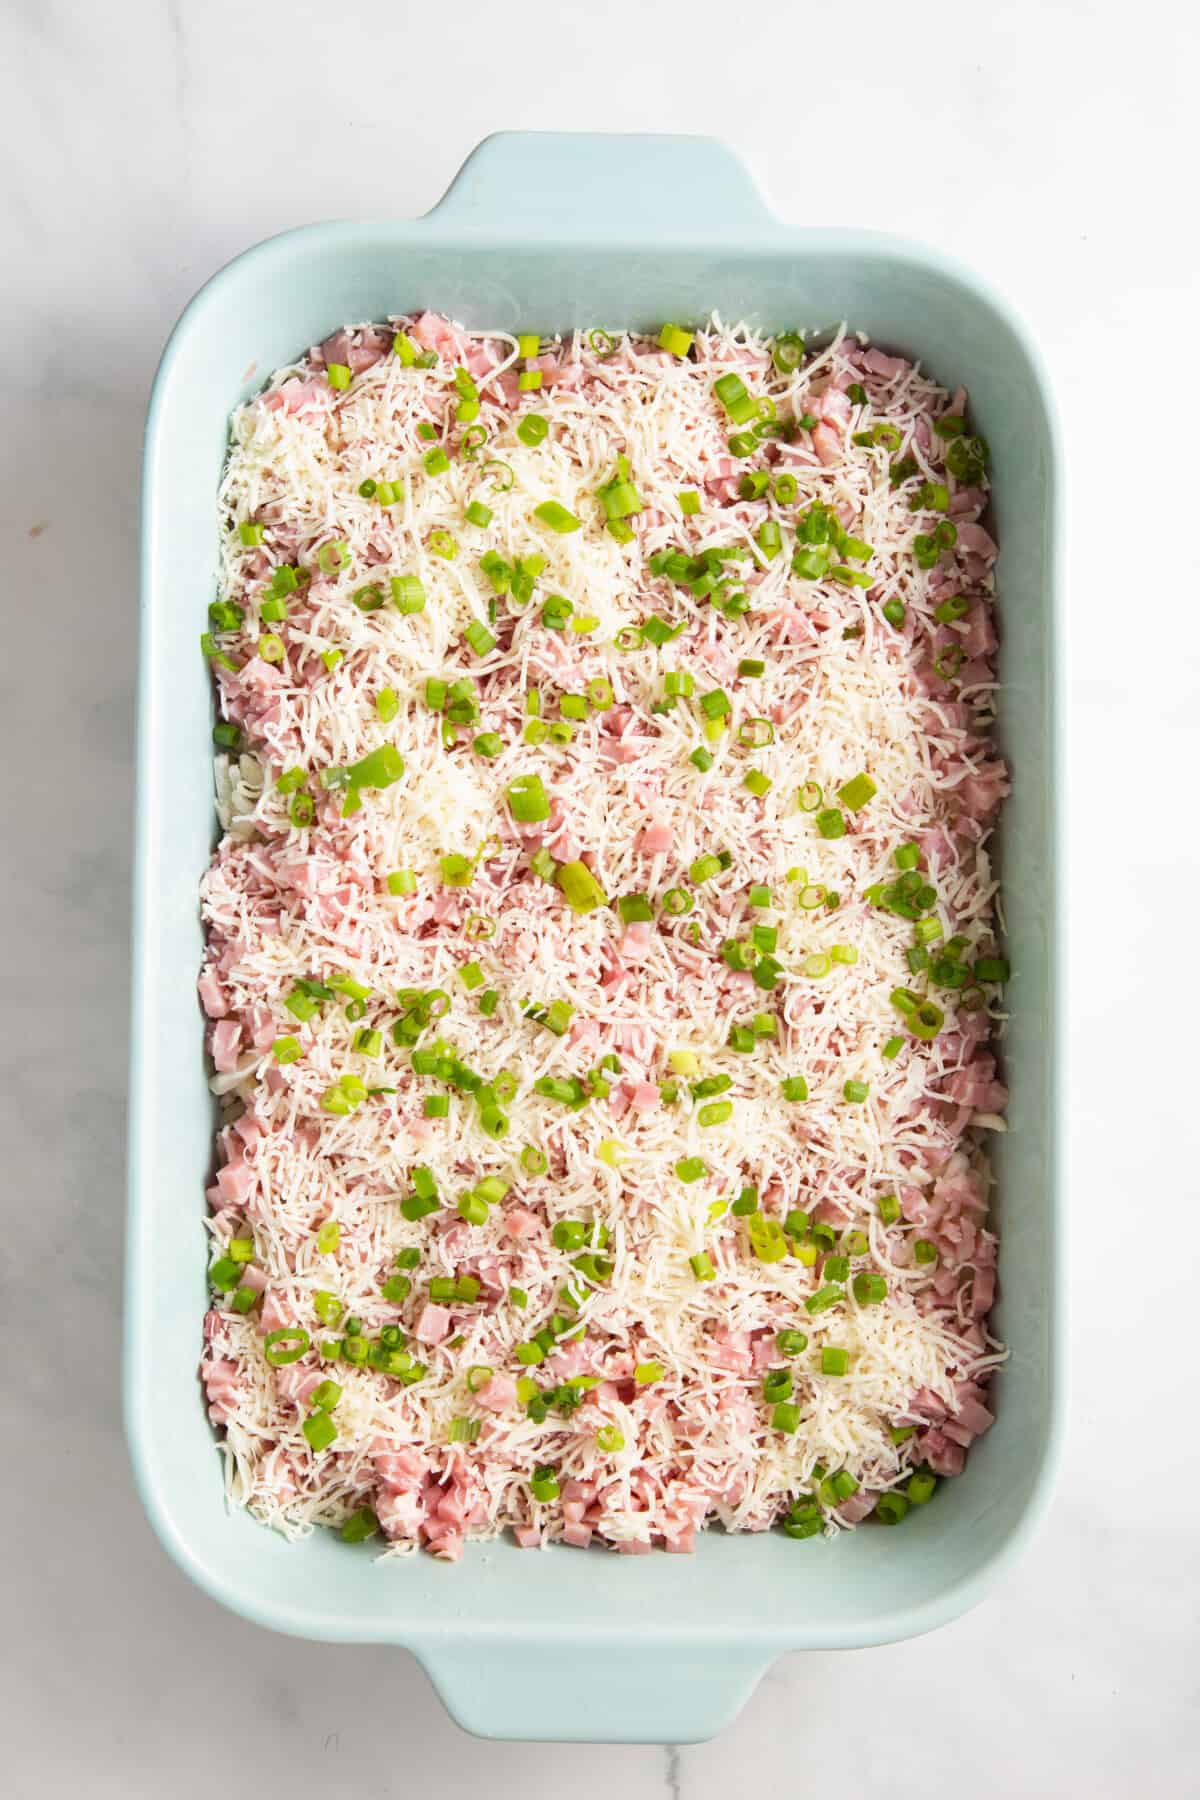 light blue 9x13 casserole dish with frozen hashbrowns, chopped ham, shredded cheese and chopped green onions